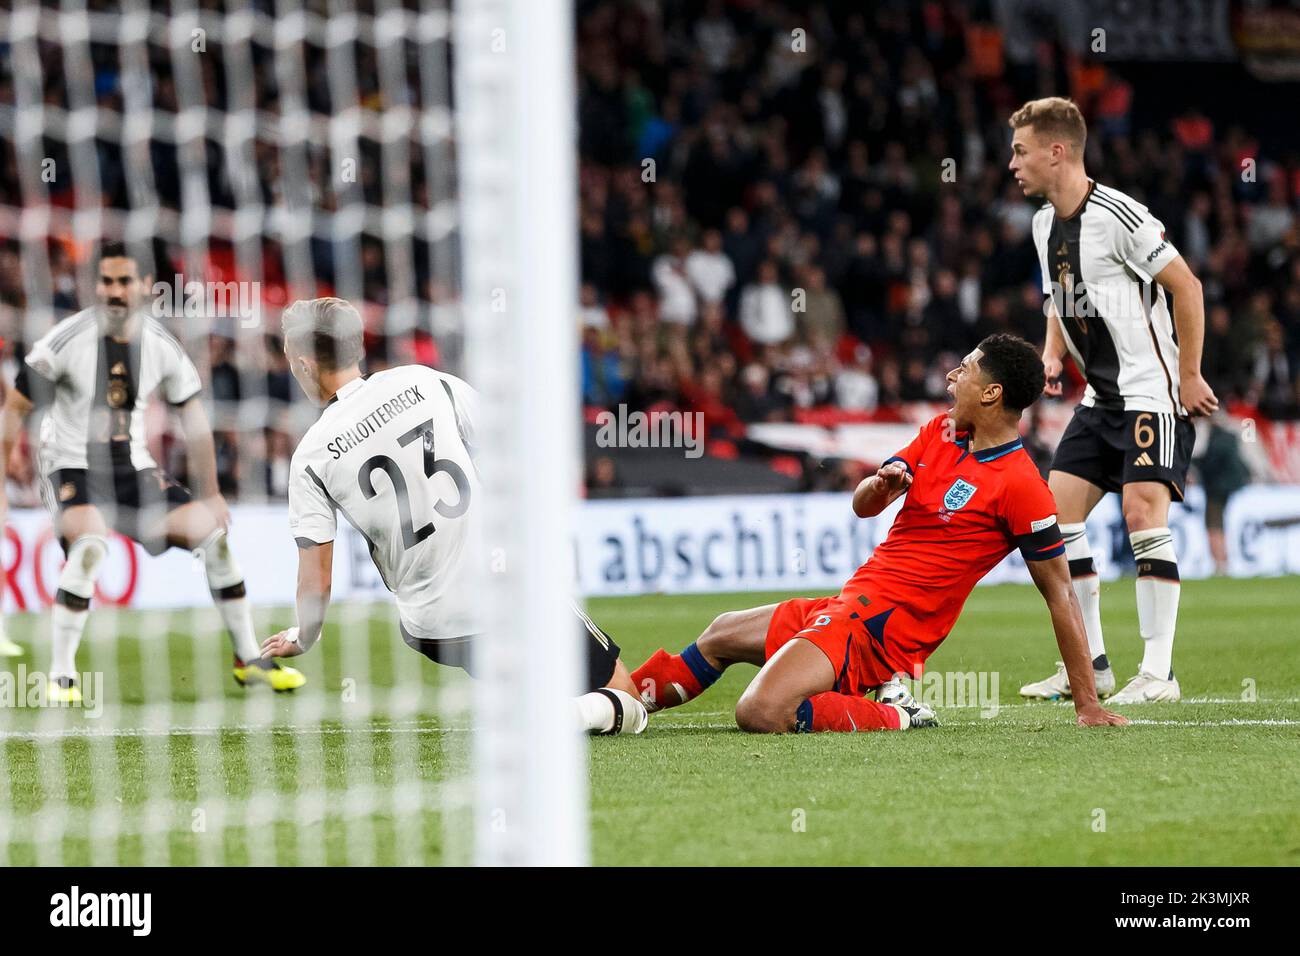 London, UK. 26th Sep, 2022. Jude Bellingham of England is fouled by Nico Schlotterbeck of Germany for a penalty during the UEFA Nations League Group C match between England and Germany at Wembley Stadium on September 26th 2022 in London, England. (Photo by Daniel Chesterton/phcimages.com) Credit: PHC Images/Alamy Live News Stock Photo